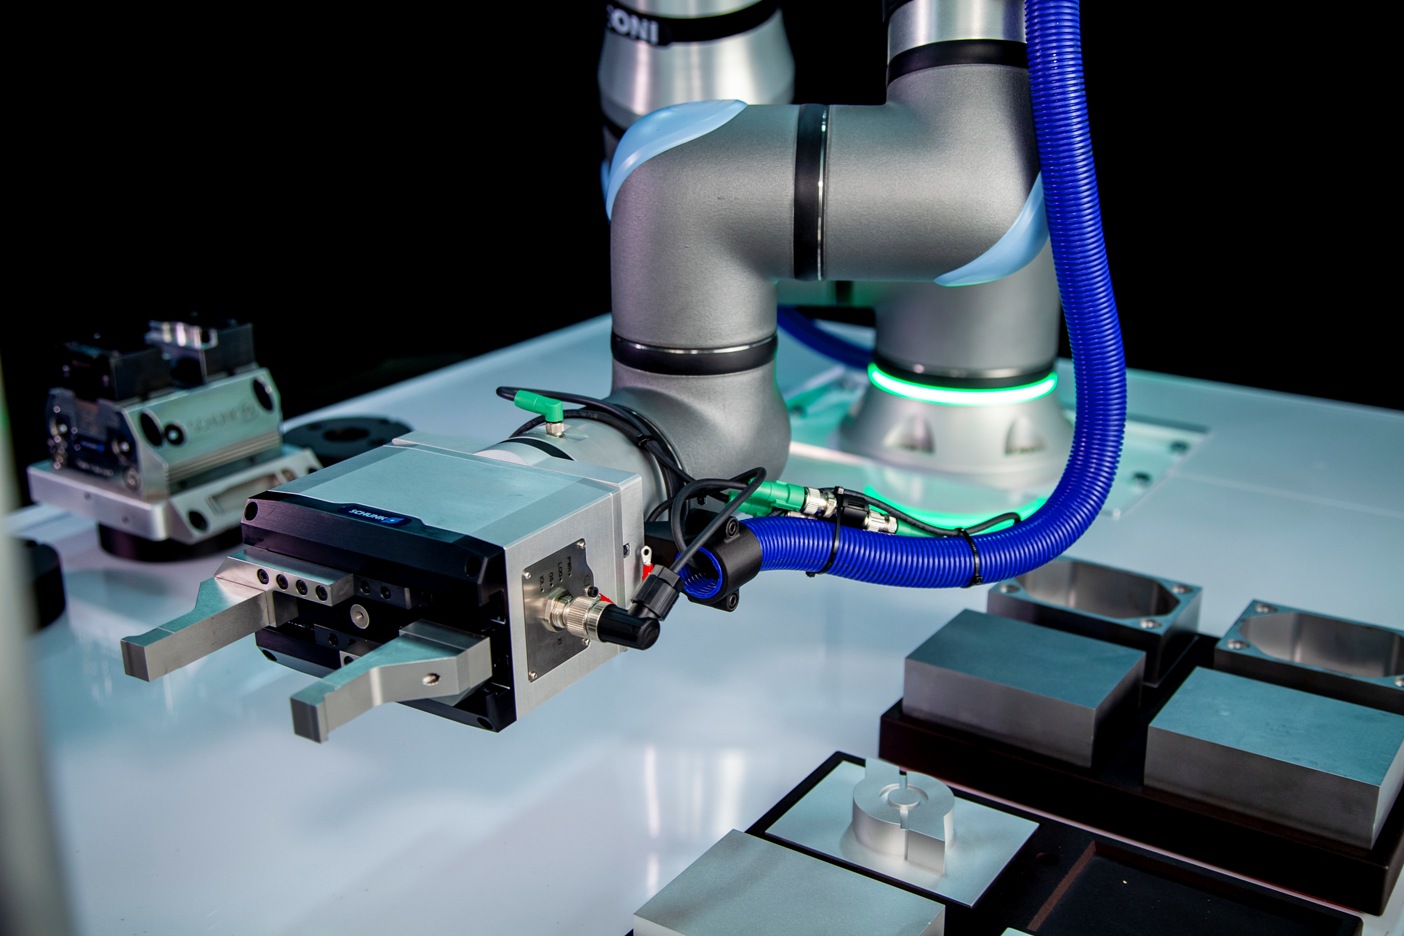 An important application for cobots is machine tending, serving machinery used by human operators